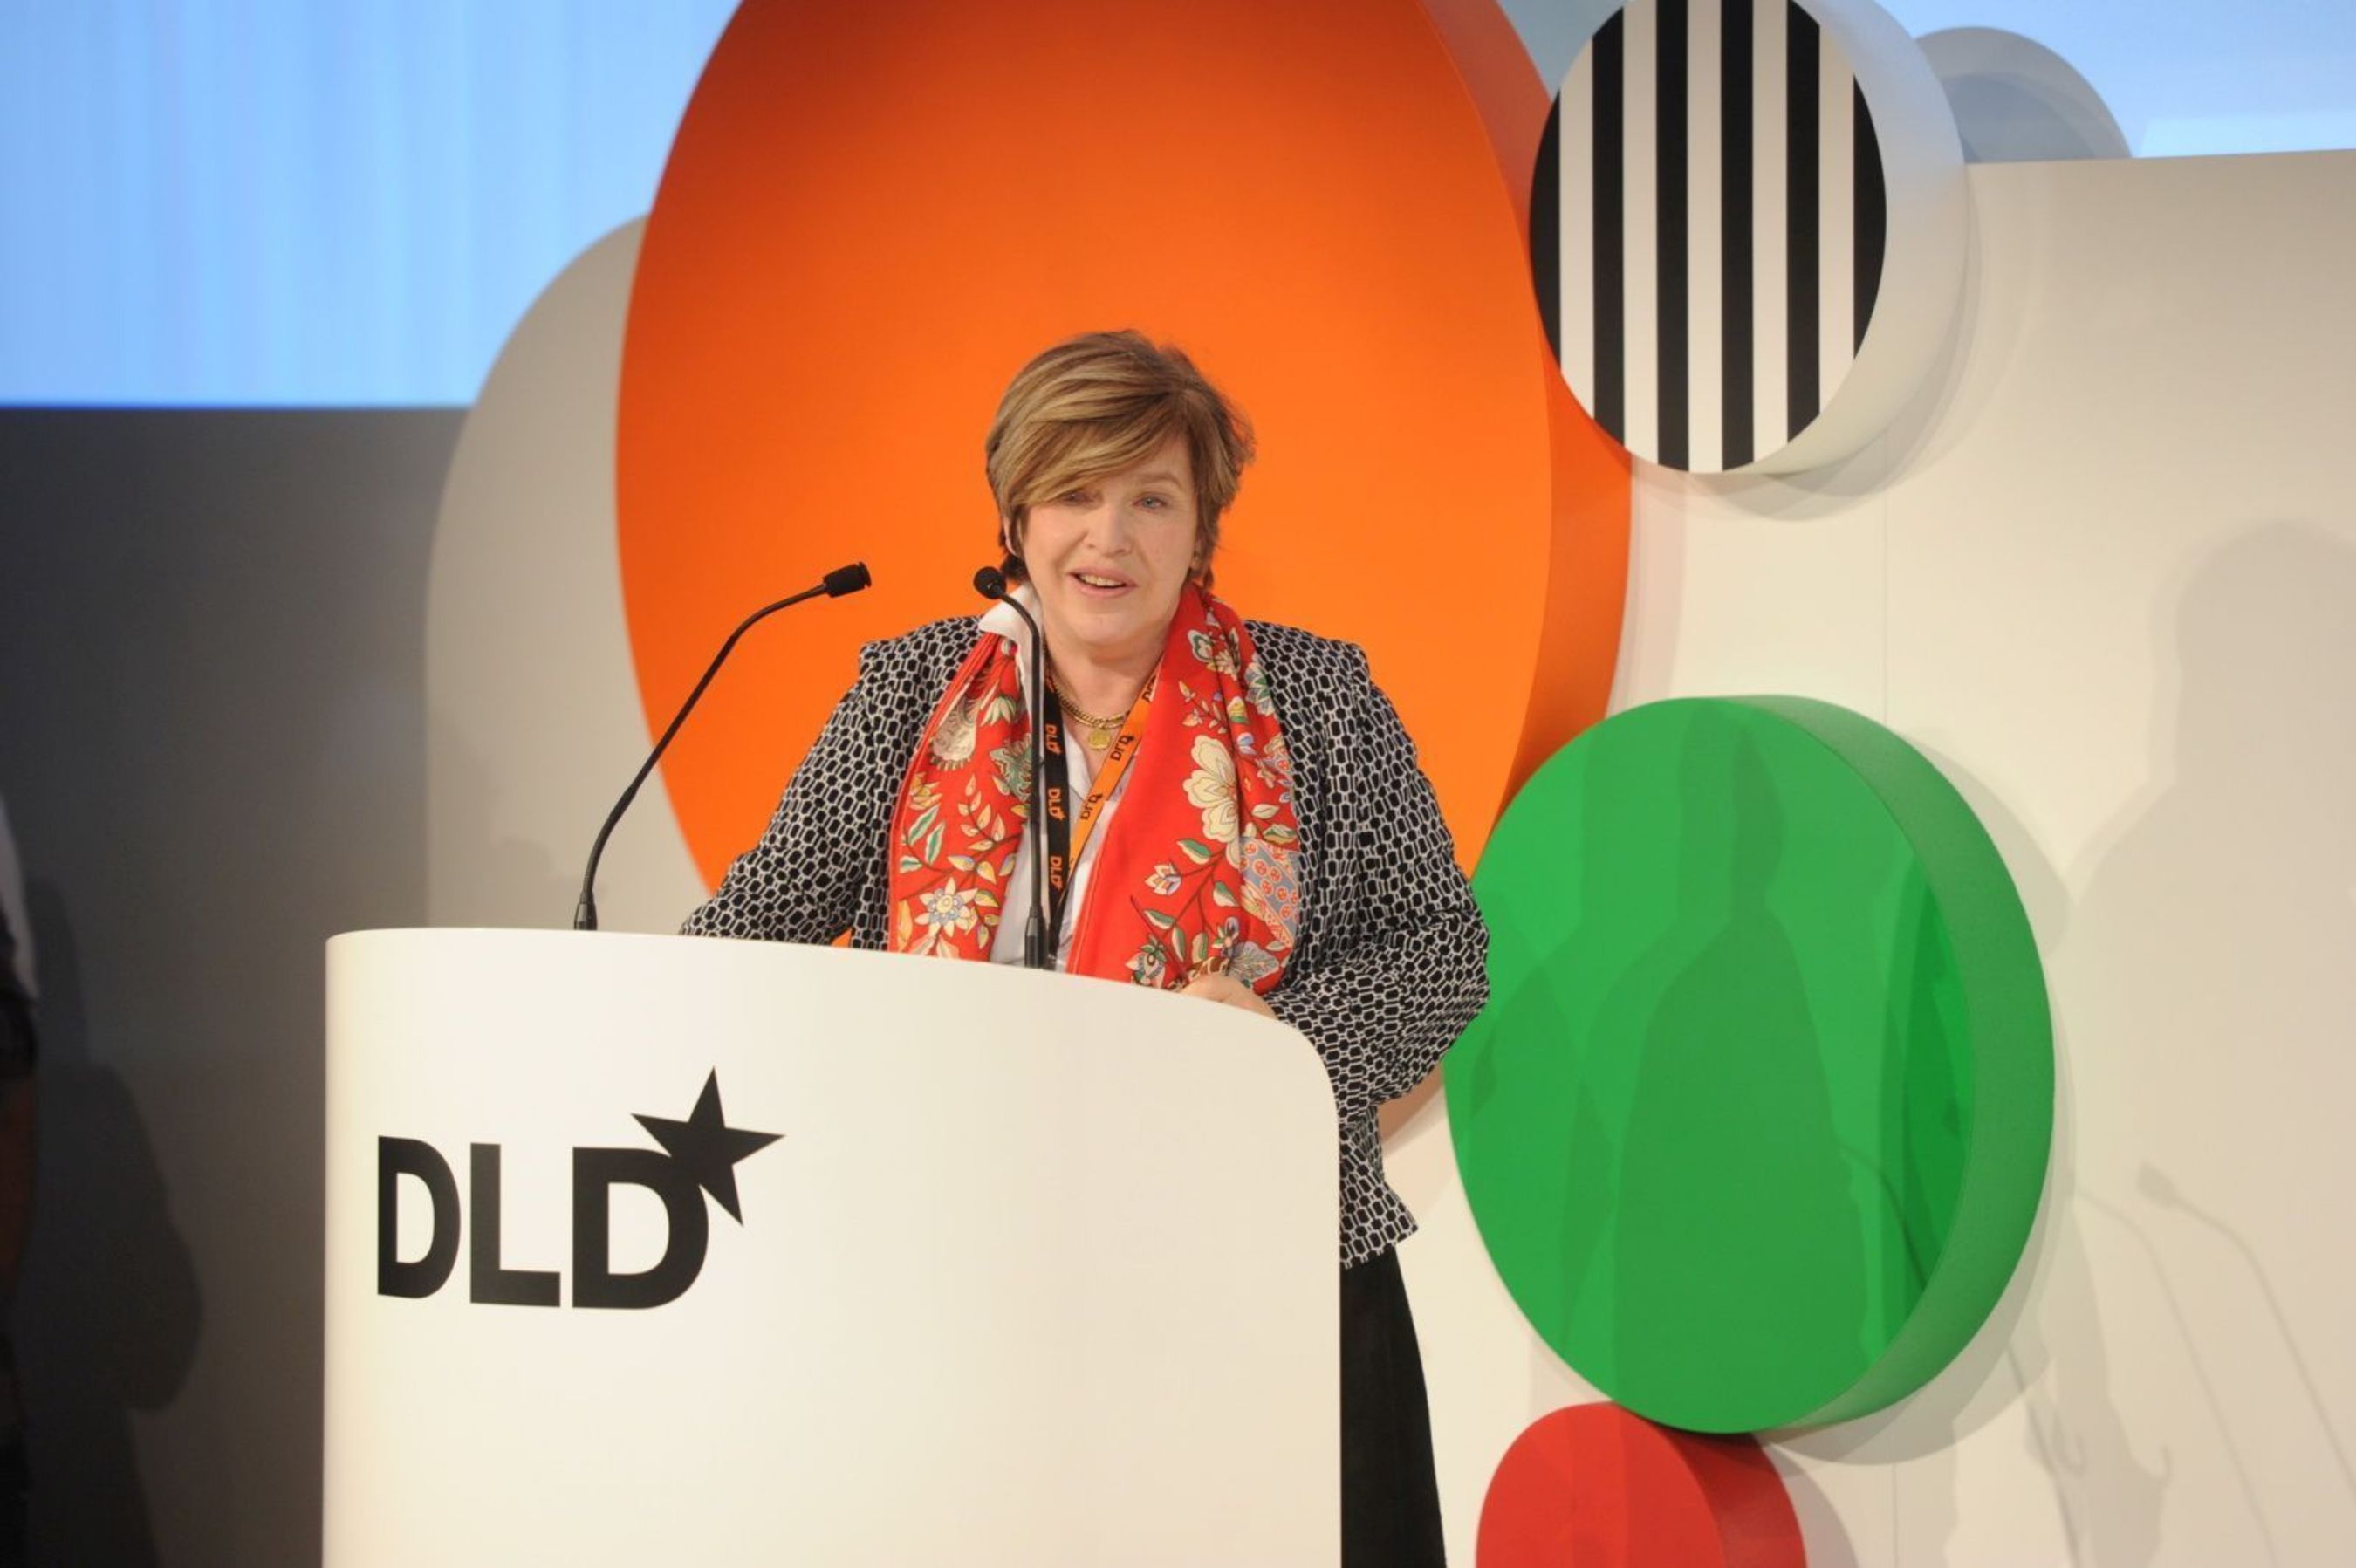 DLD founder and manager Steffi Czerny will welcome more than 150 international speakers at DLD15 to discuss the influence of continued digitalisation on society, the world of work, industry, mobility, art and design. (PRNewsFoto/Hubert Burda Media)